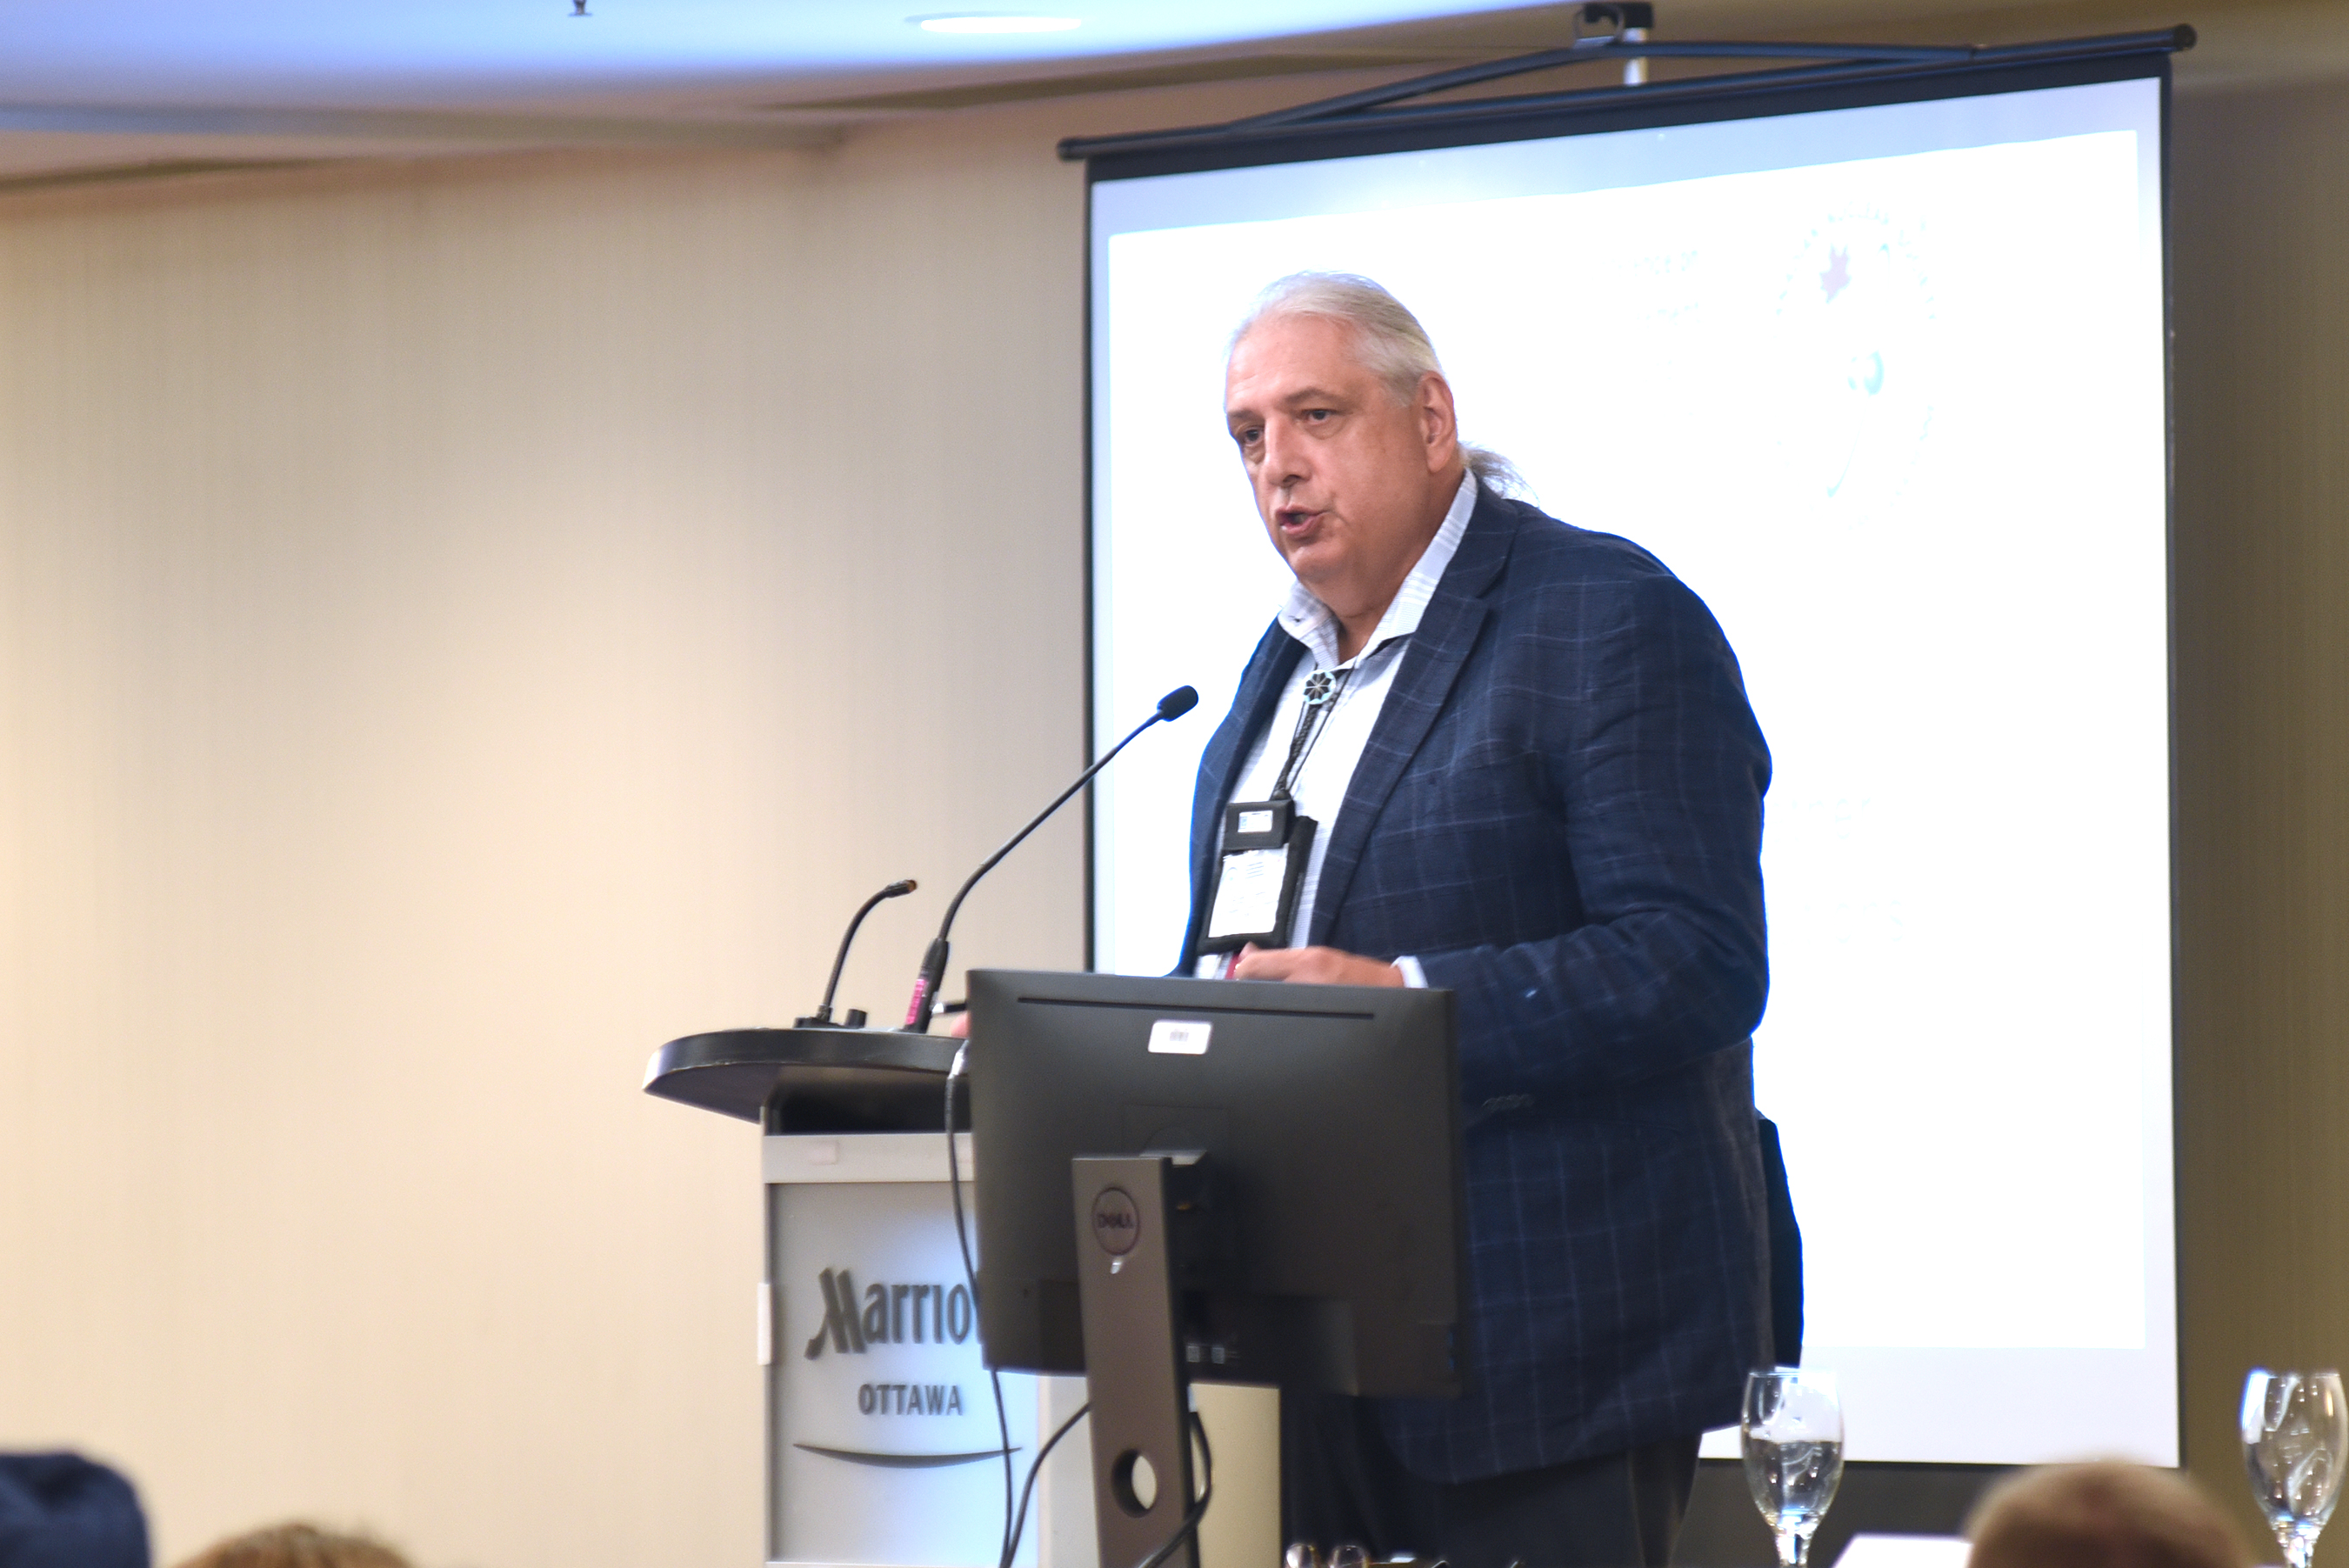 Bob Watts, Vice-President of Indigenous Relations at the NWMO, chaired a panel discussion, titled Community and Indigenous engagement, at the Canadian Nuclear Society’s (CNS) 4th Nuclear Waste Management, Decommissioning and Environmental Restoration (NWMDER) Conference in Ottawa, Ont.